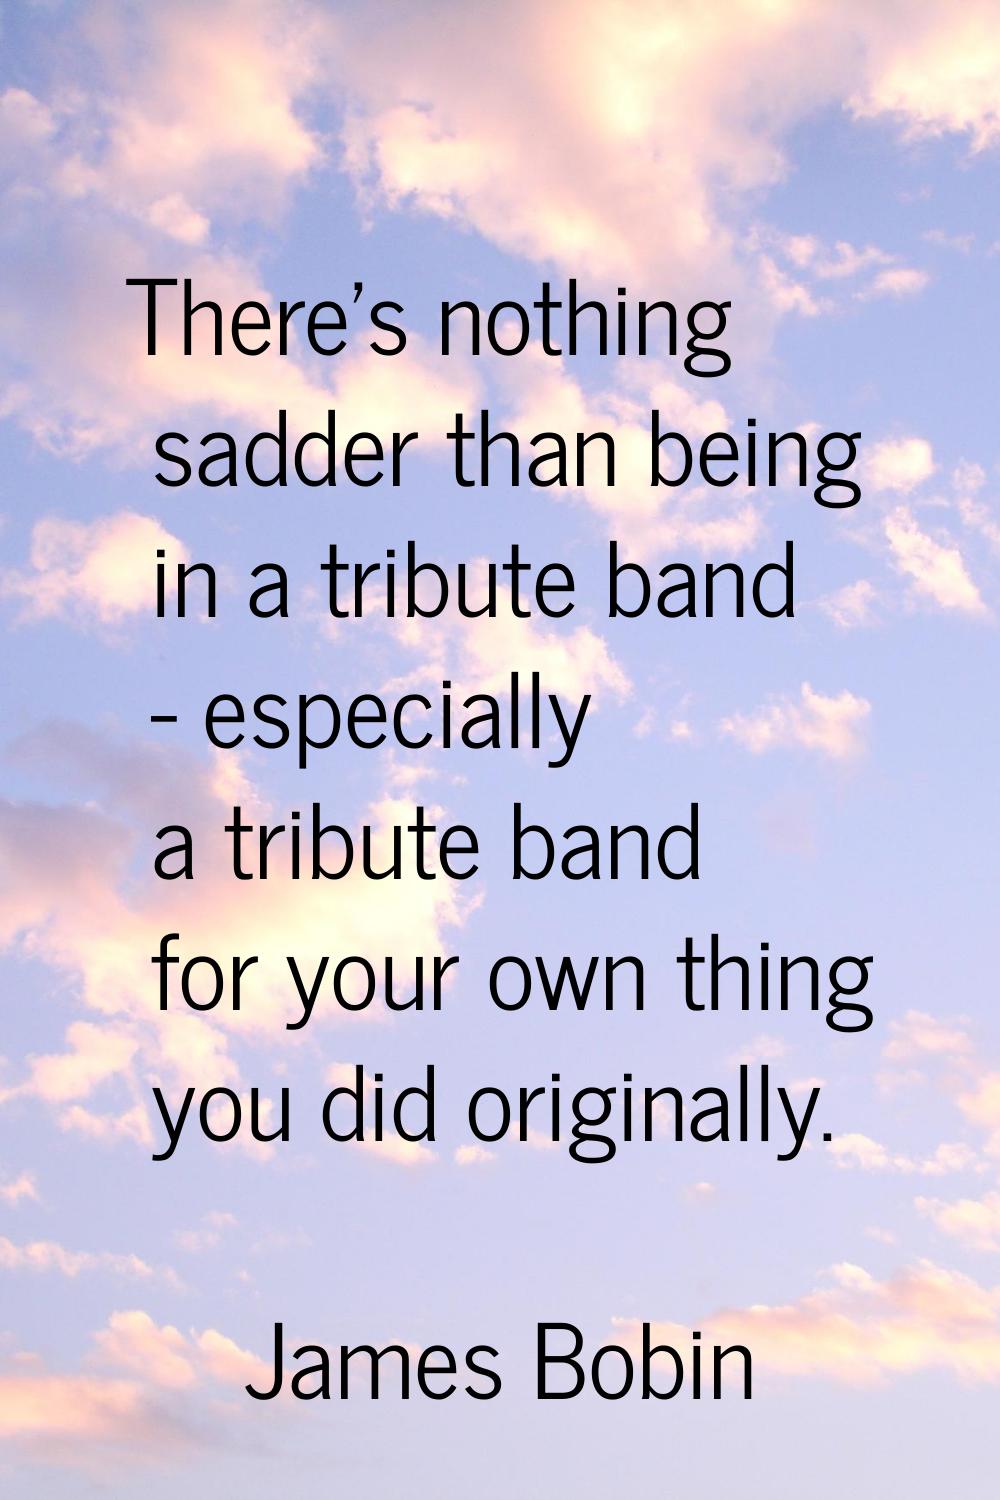 There's nothing sadder than being in a tribute band - especially a tribute band for your own thing 